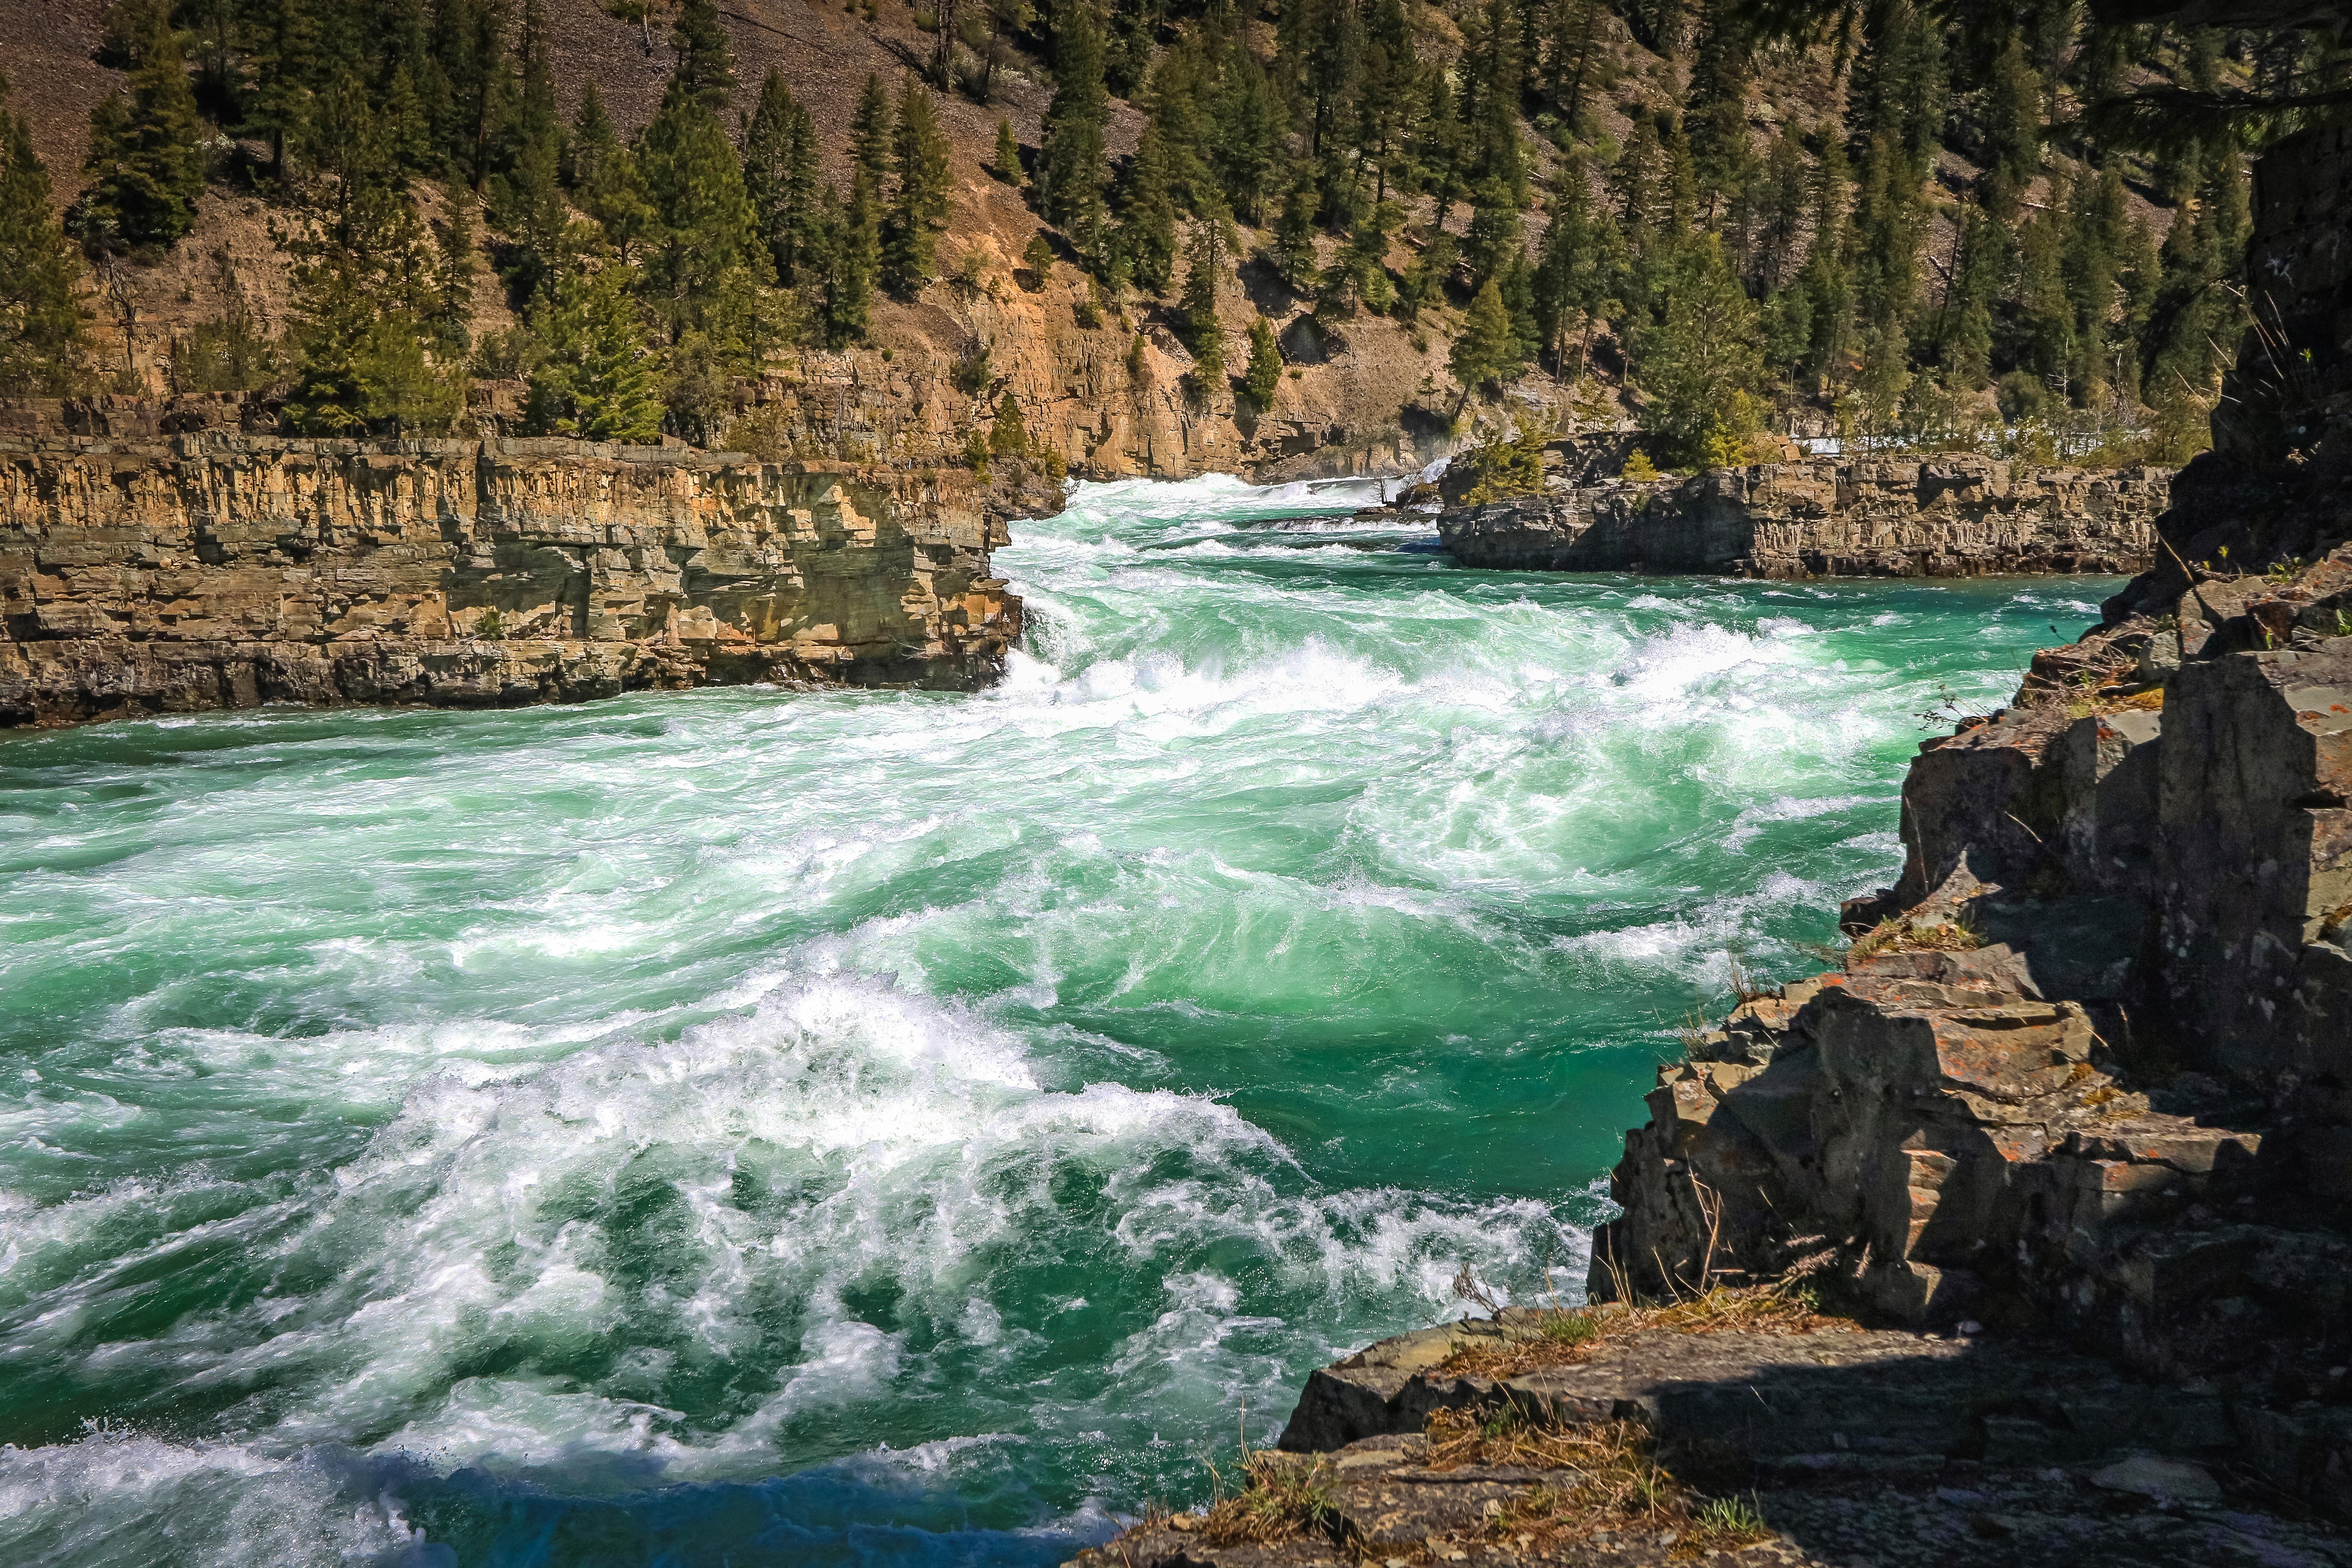 Flowing river by tim-peters-on-unsplash